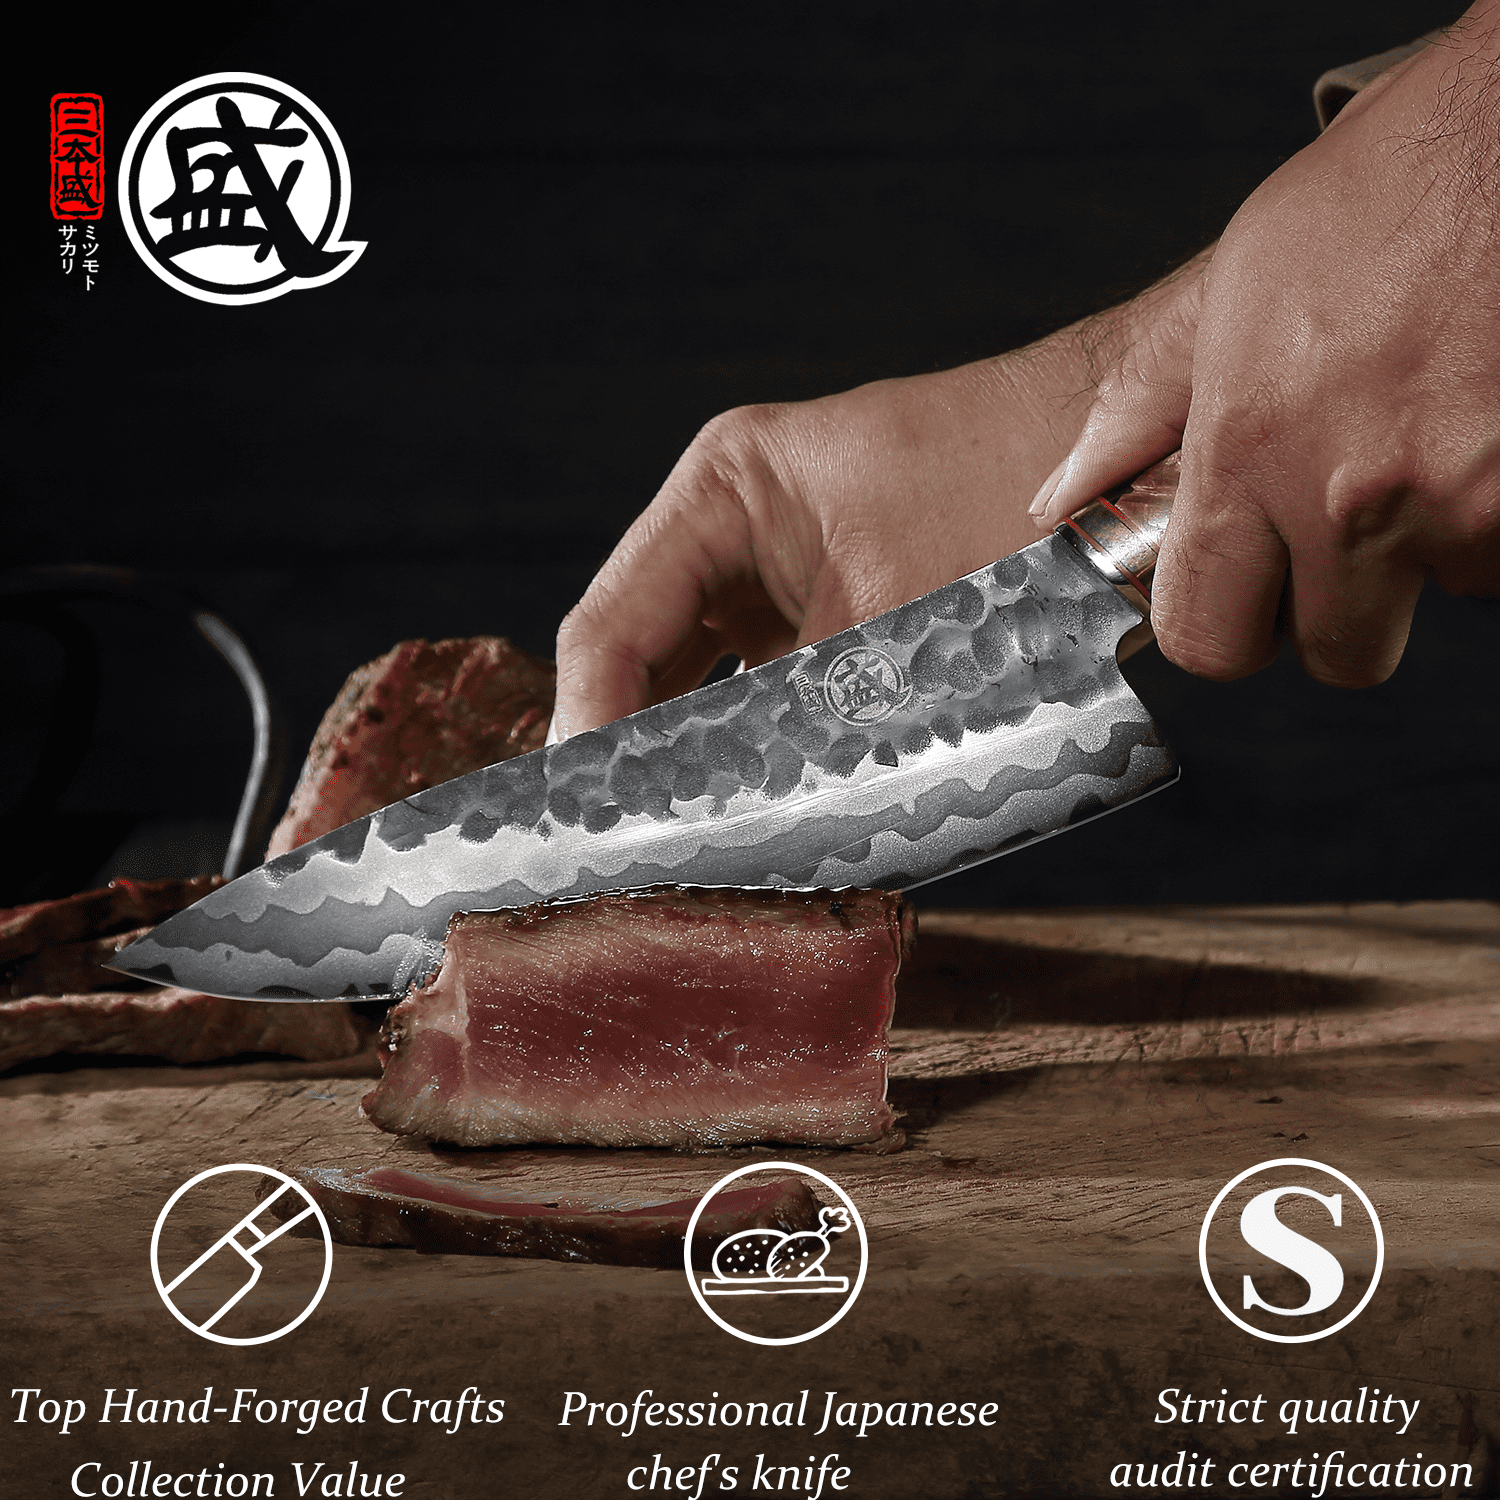 Mad Shark Santoku Knife Pro Chef's Knife 8 inch Kitchen Knife Sharp Japanese Cooking Knife, Non-Stick & Finger Guard Included